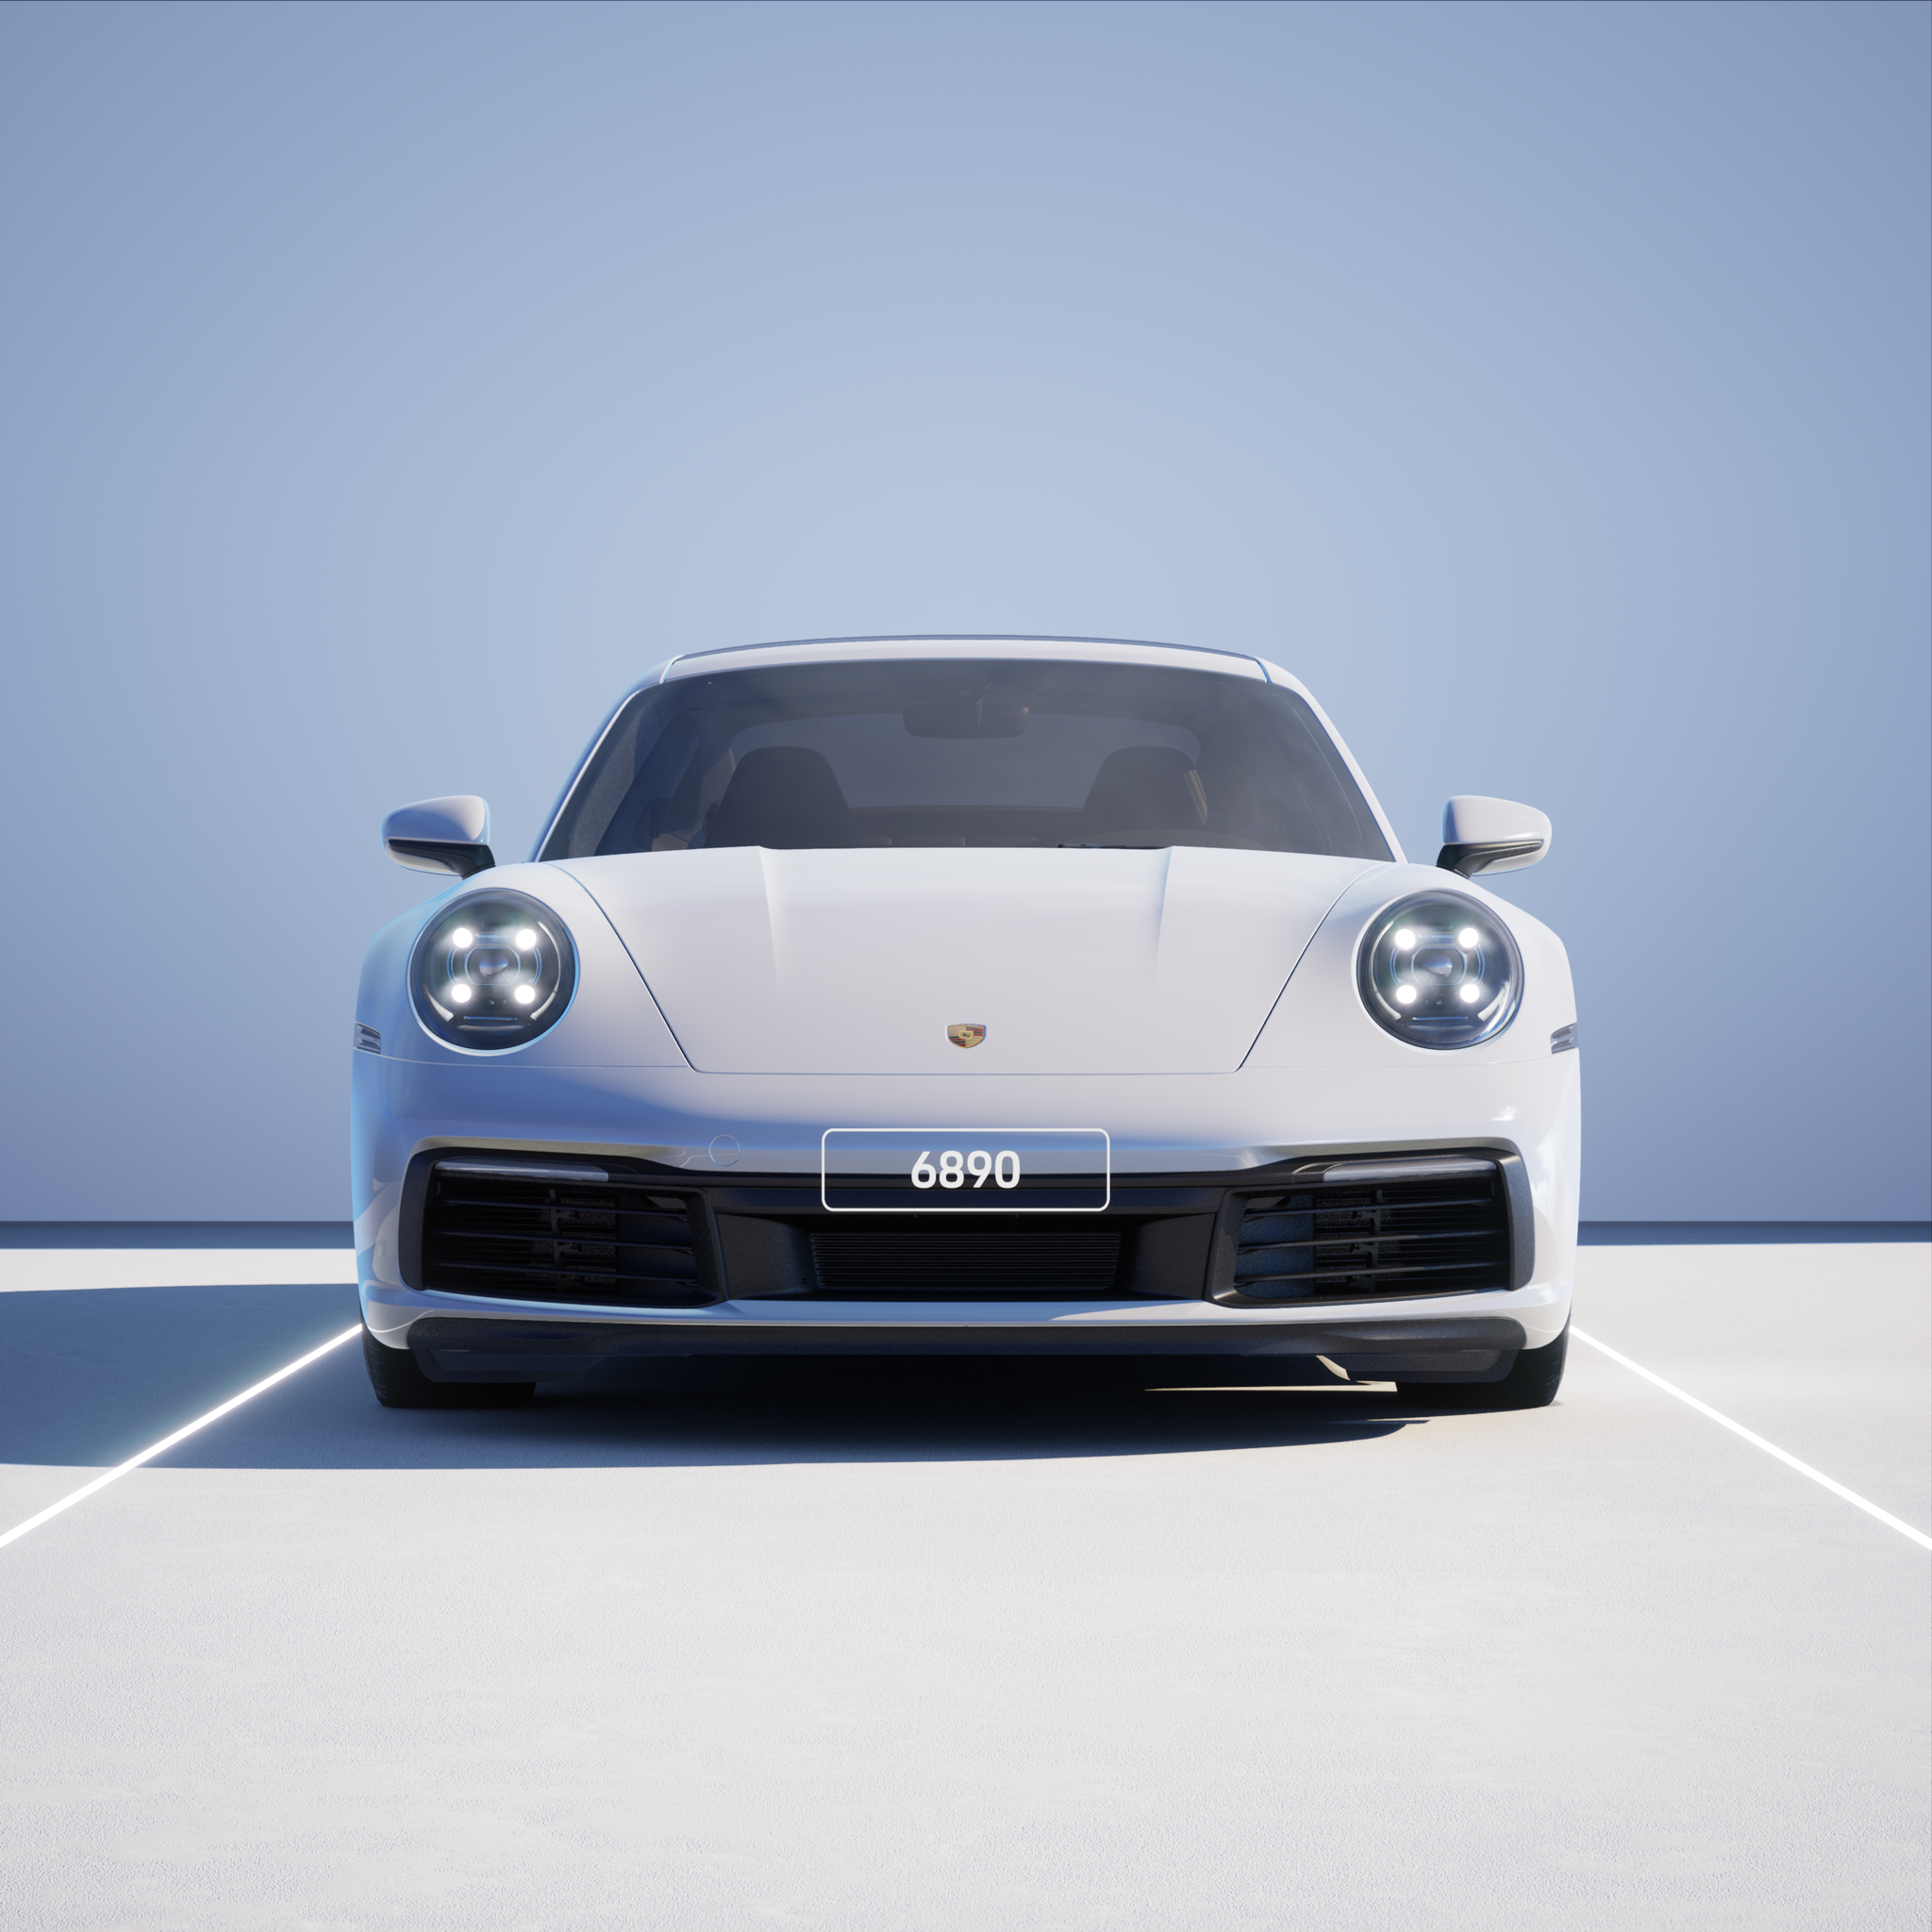 The PORSCHΞ 911 6890 image in phase